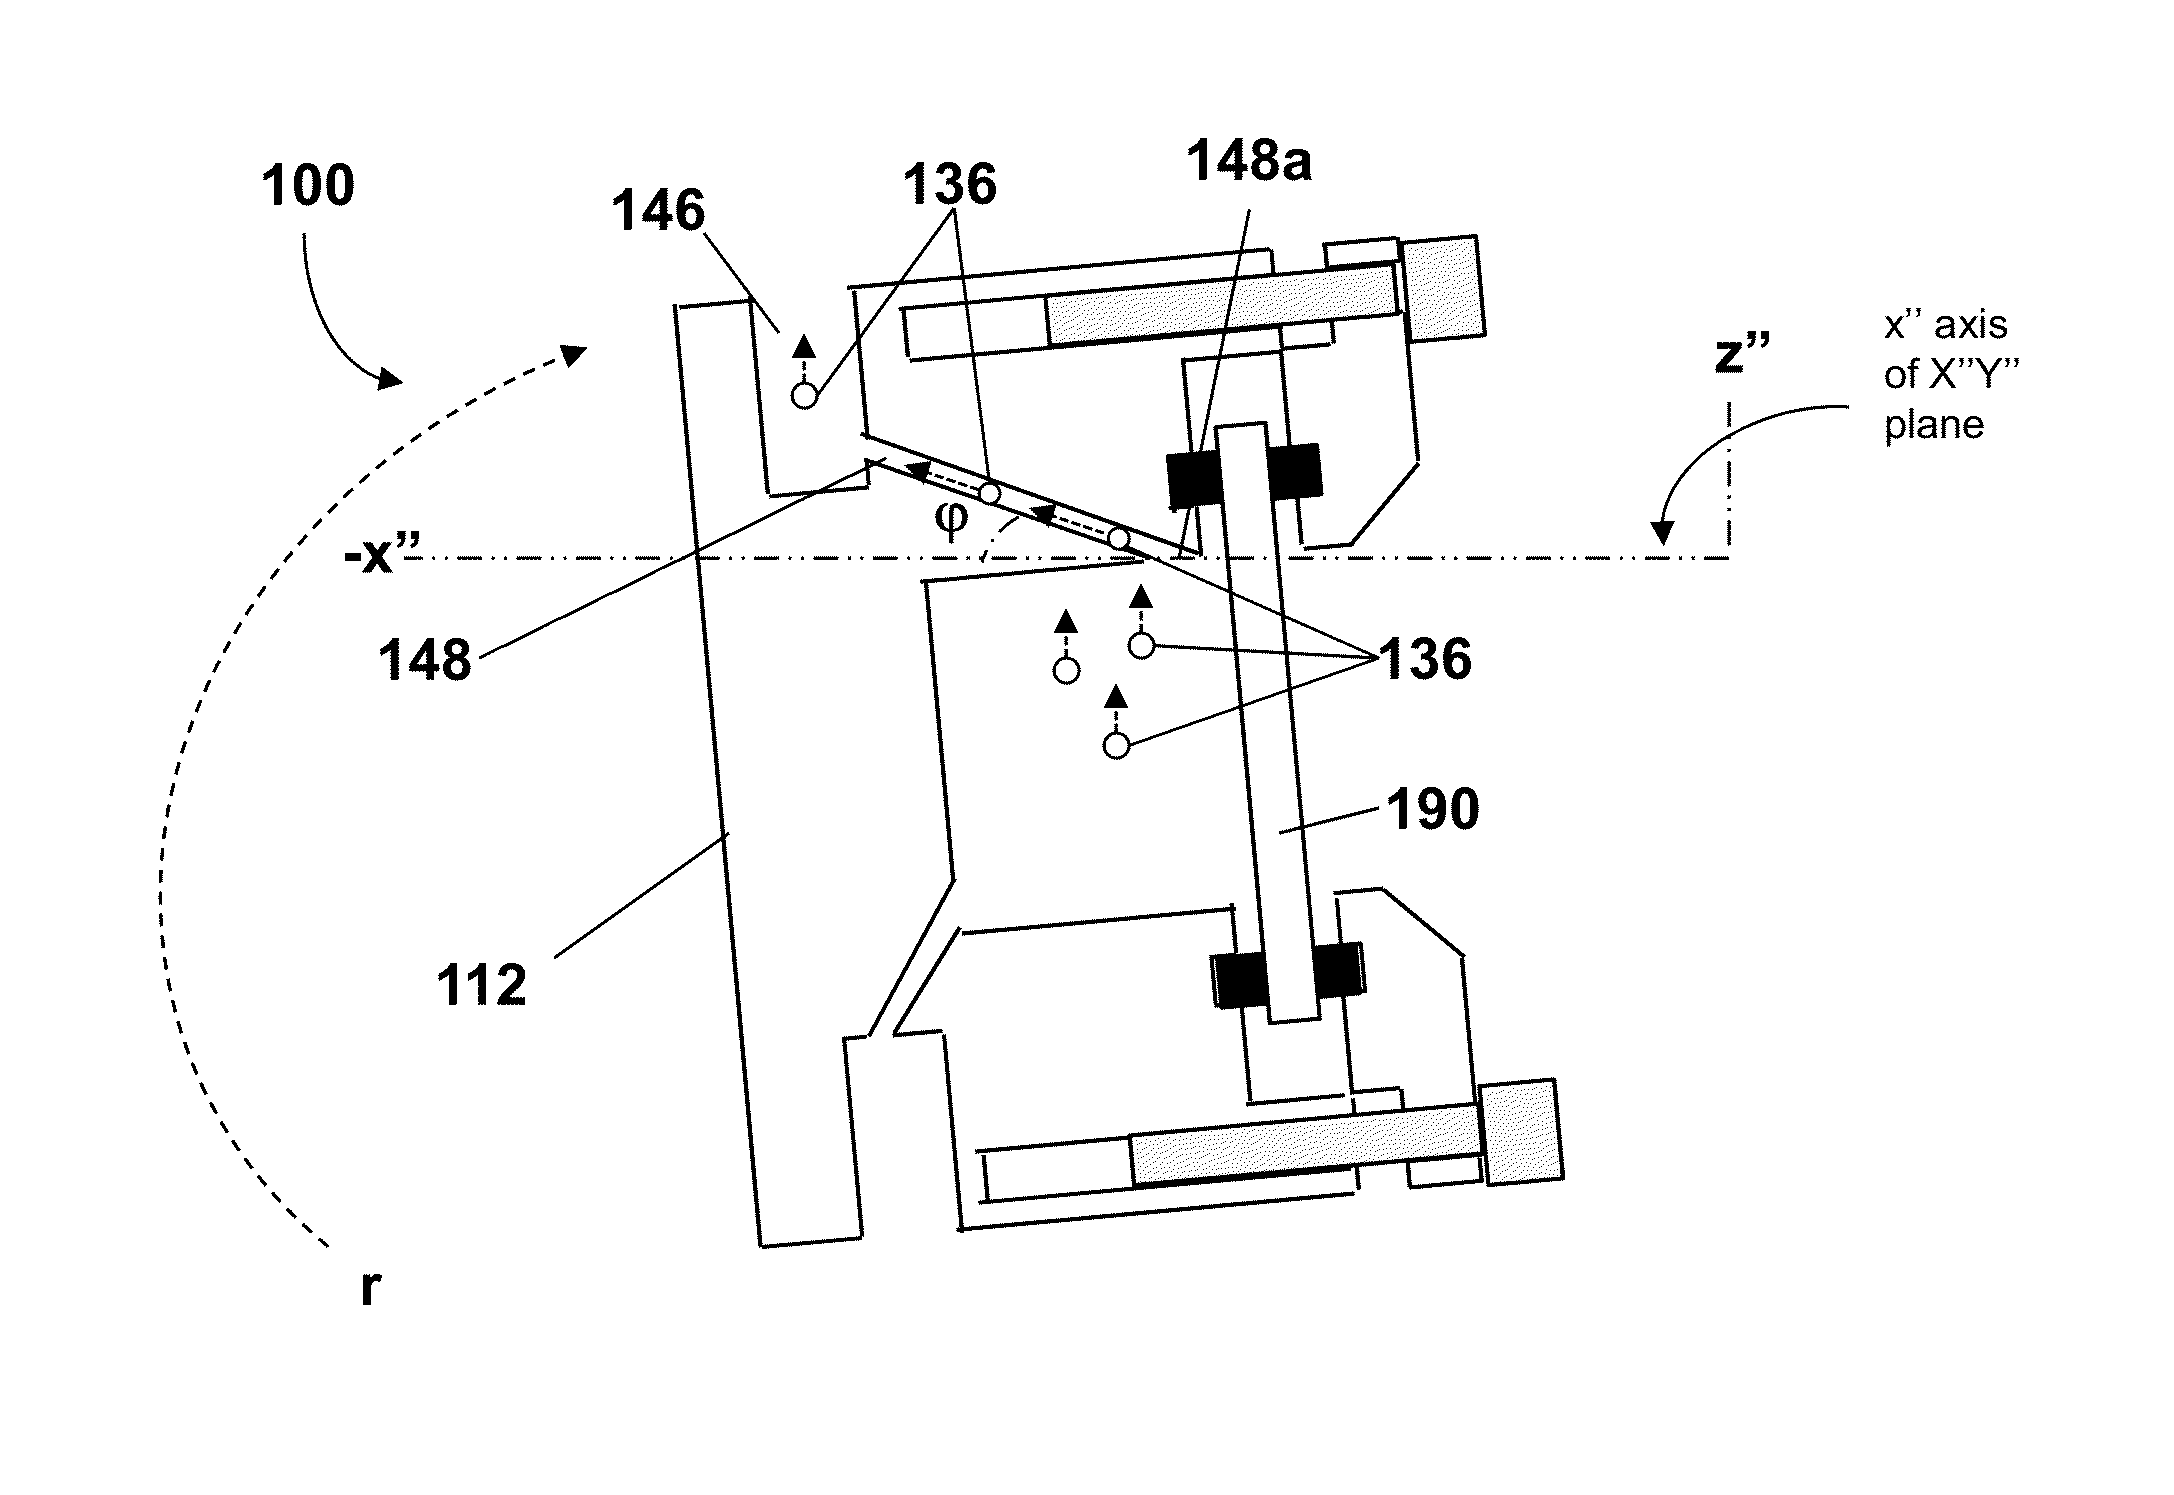 Permeability flow cell and hydraulic conductance system